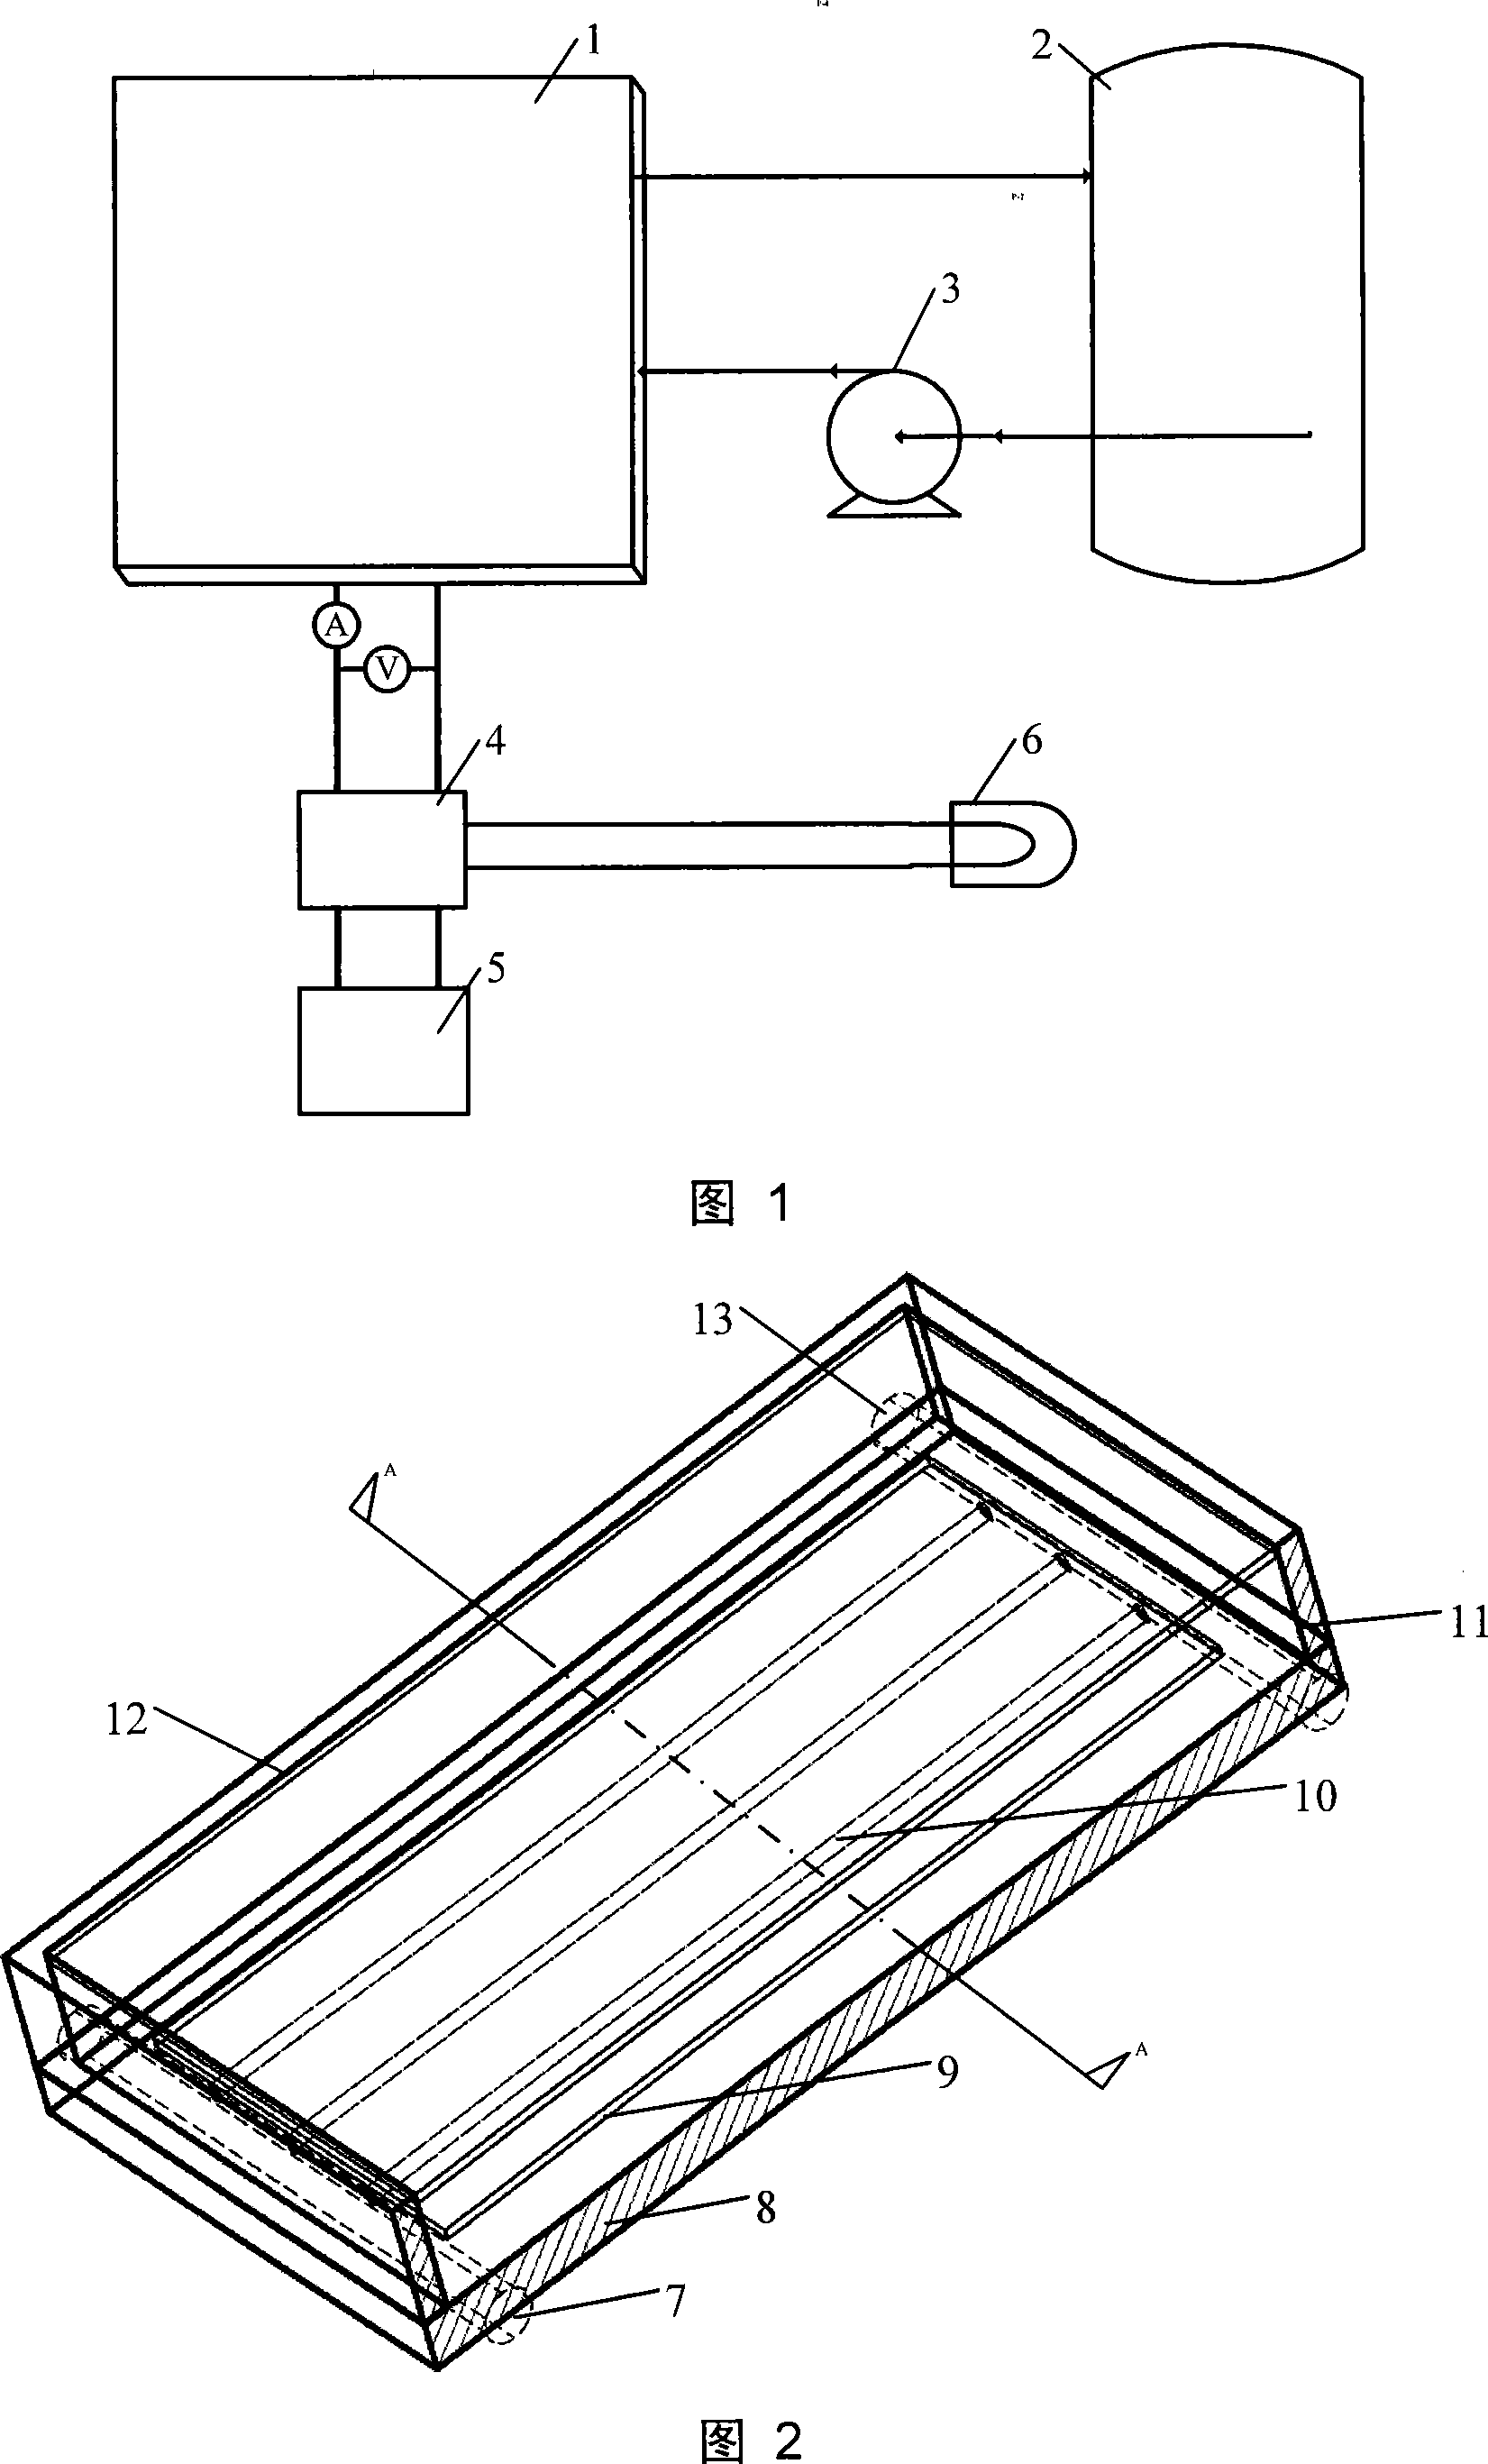 Solar photovoltaic/photothermal combined apparatus